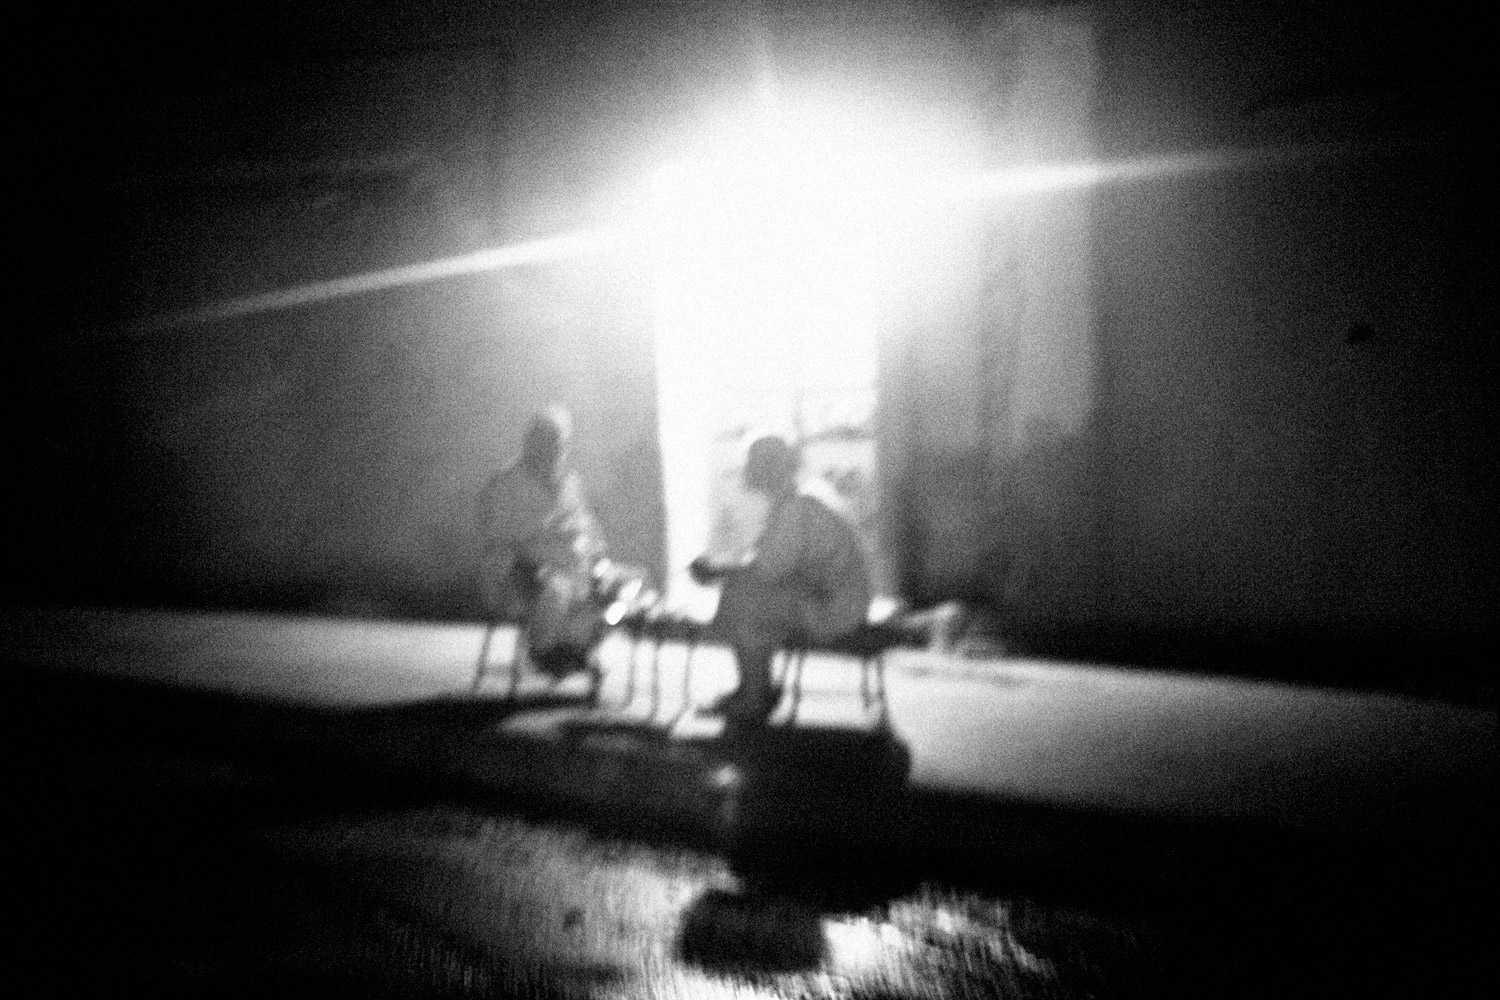 Two men sit on a street in the Syrian city of Hama, July 17, 2011.